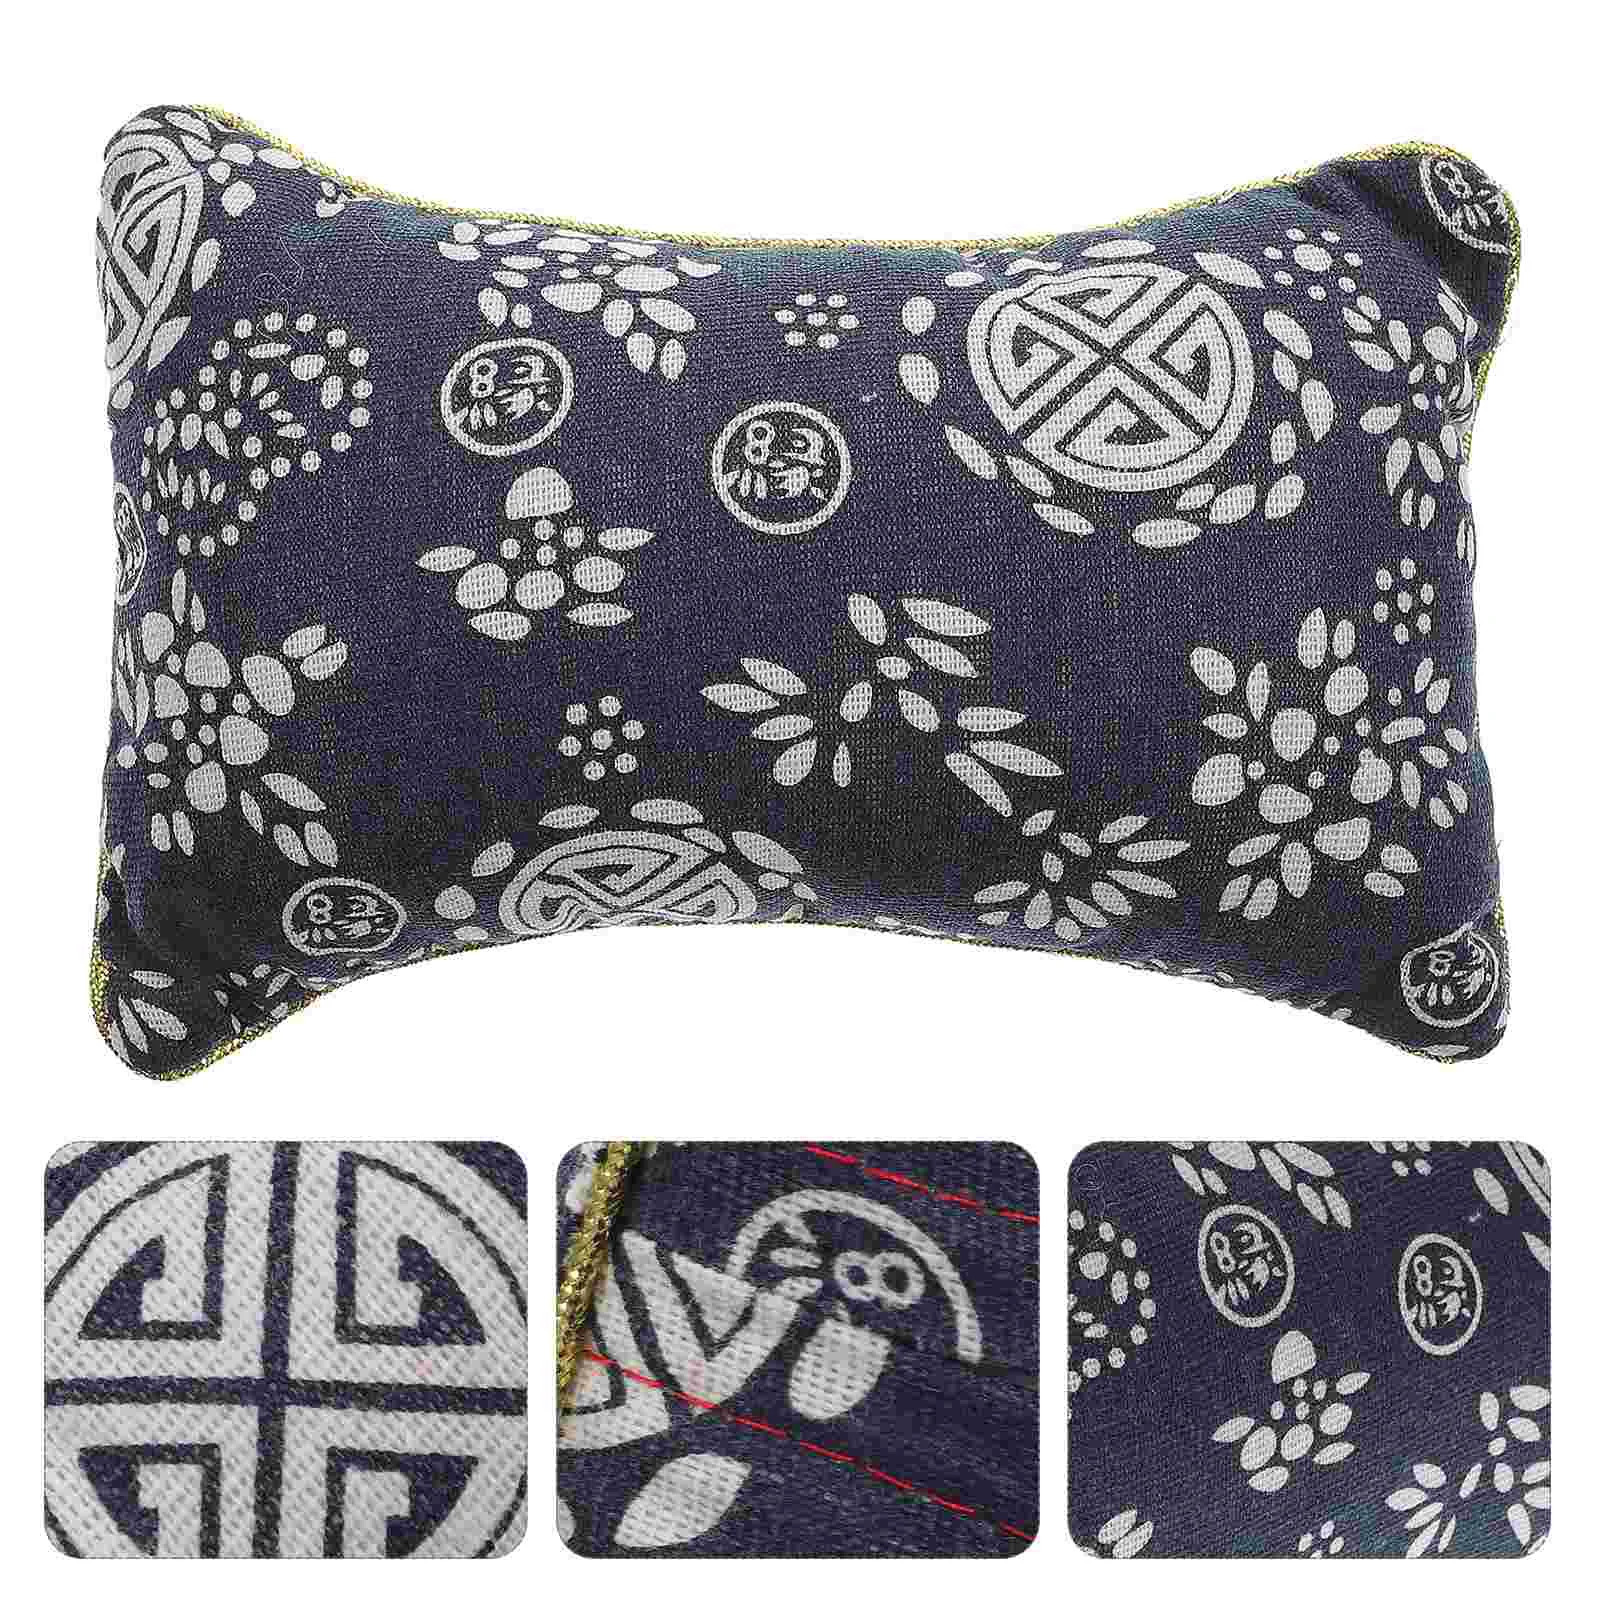 Pulse Pillow Nail Set Tool Hand Support Rest Cushion Hand Pillow Wrist Cushion Wrist Rest Pad Cotton Pillow Chinese Medicine